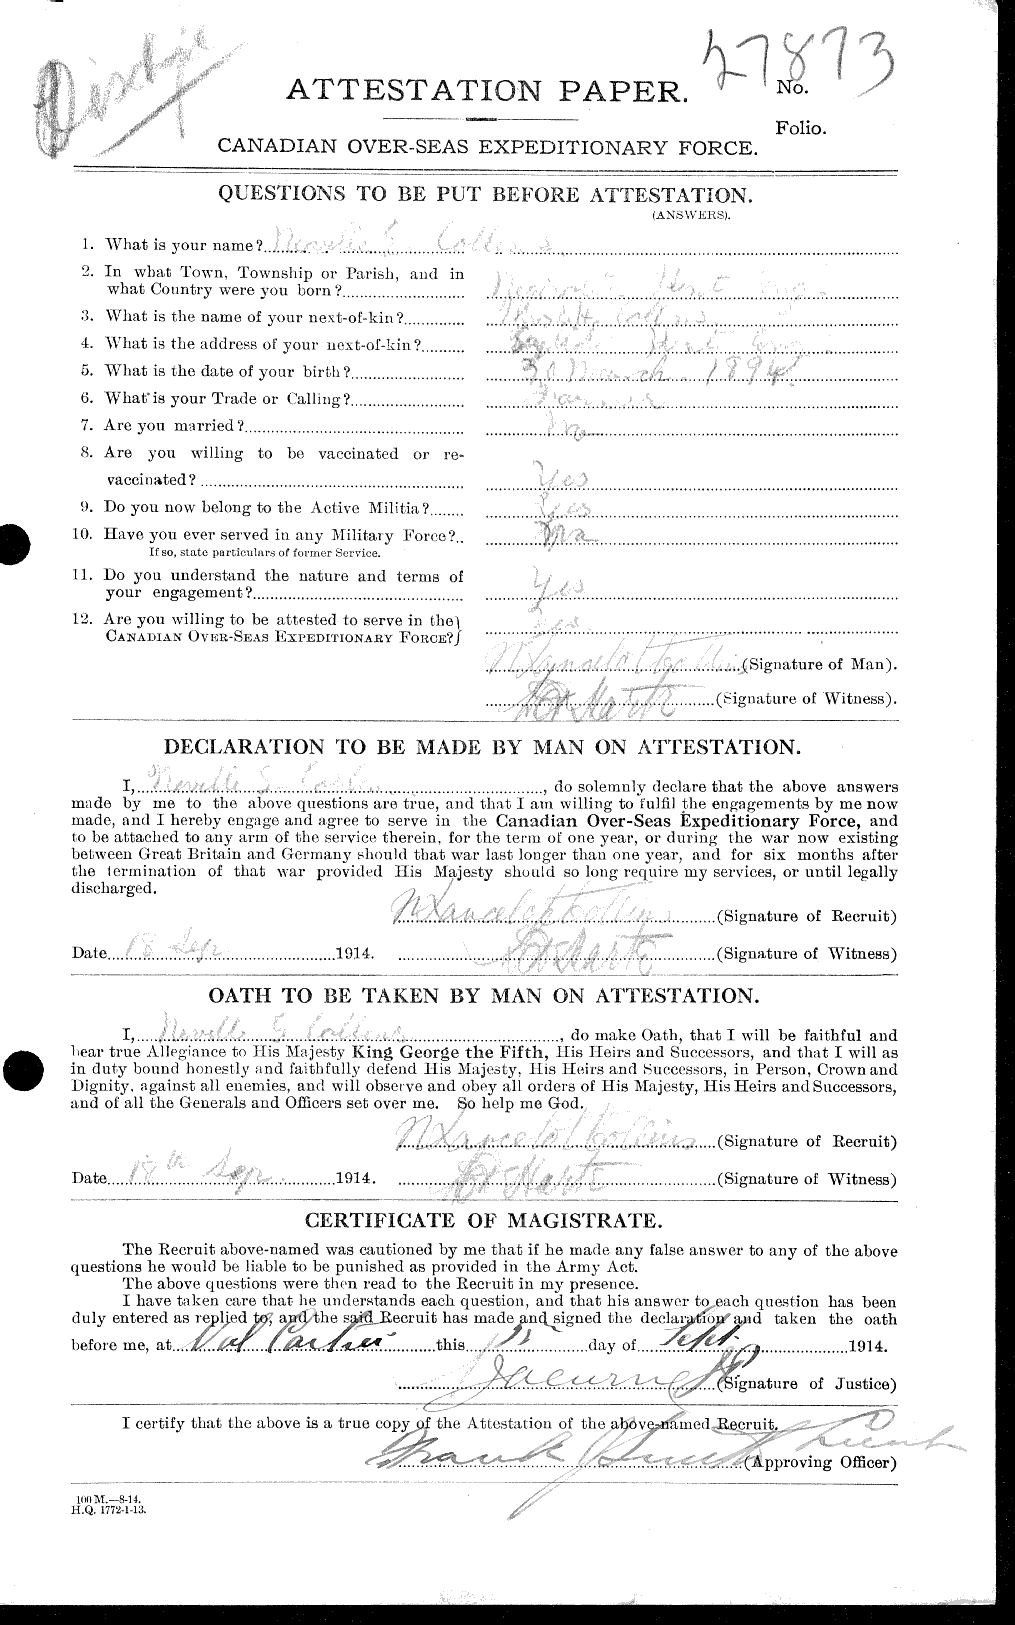 Personnel Records of the First World War - CEF 034476a